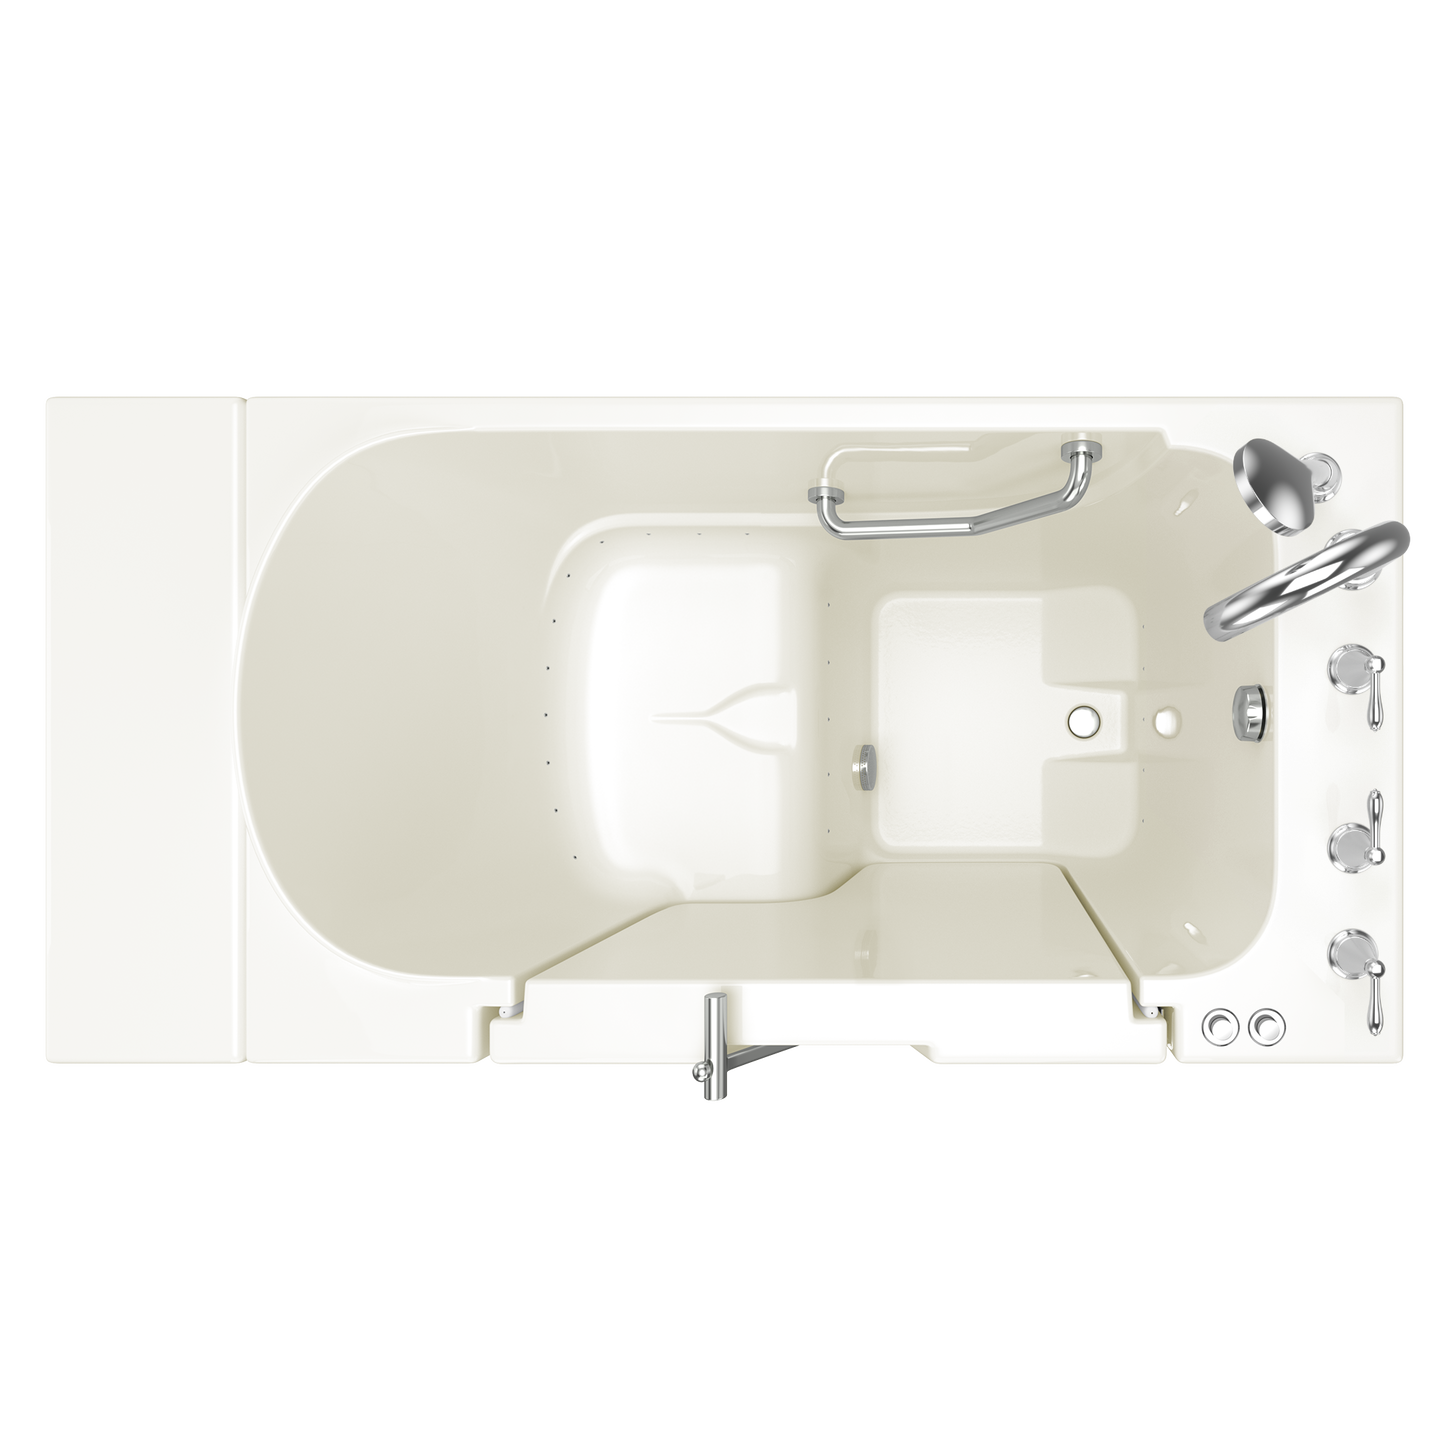 AMERICAN-STANDARD SS9OD5230RA-BC-PC, Gelcoat Premium Series 30 in. x 52 in. Outward Opening Door Walk-In Bathtub with Air Spa system in Wib Linen